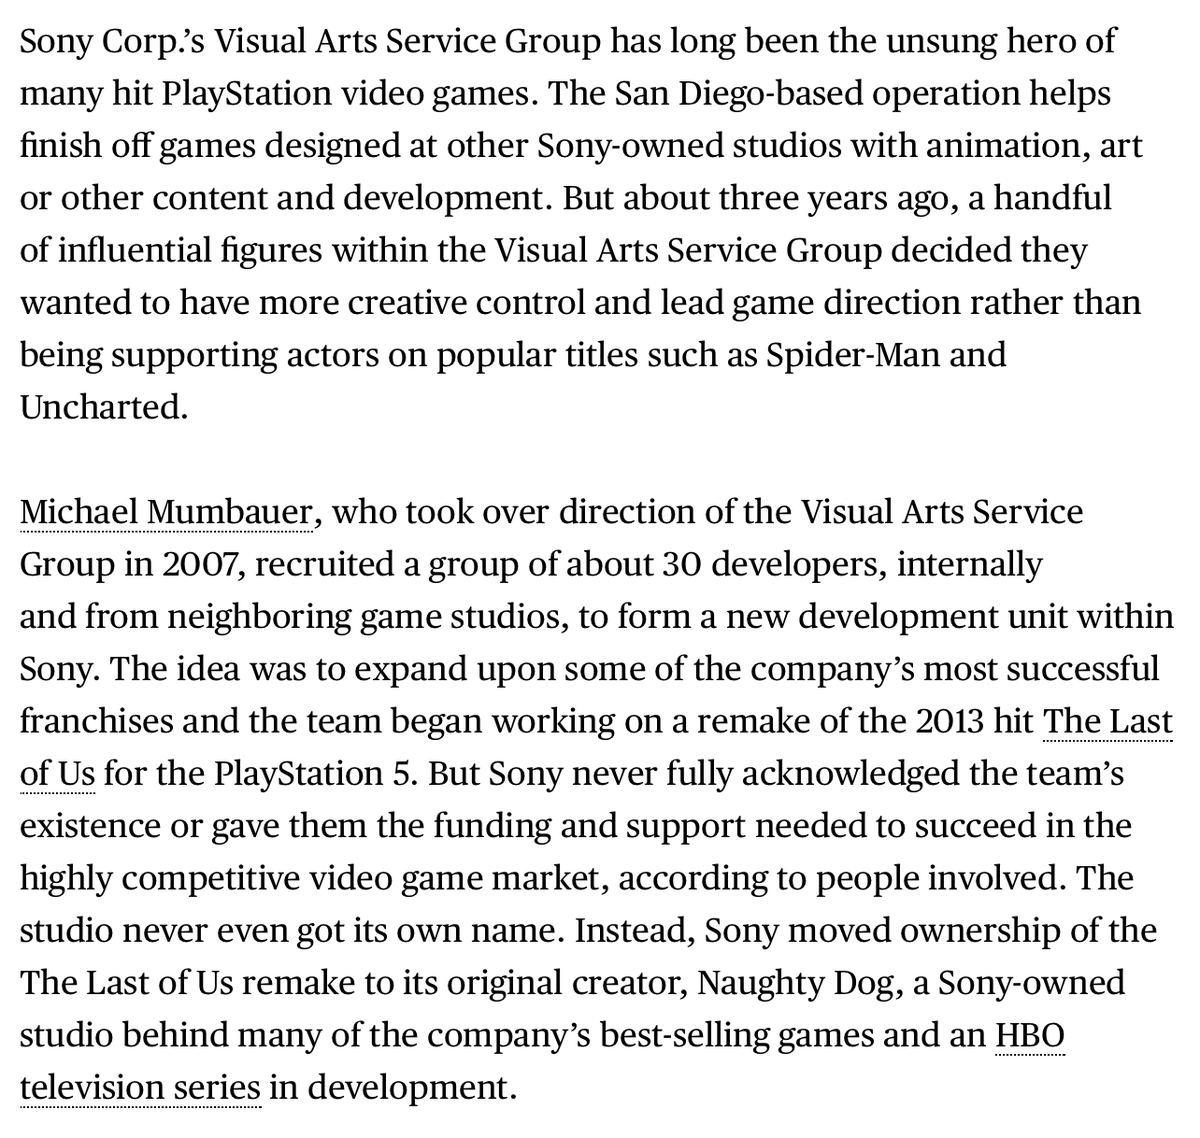 I haven't read the whole article so I'm only reacting to the opening two paragraphs for now (1/x)  https://twitter.com/jasonschreier/status/1380476925811032065